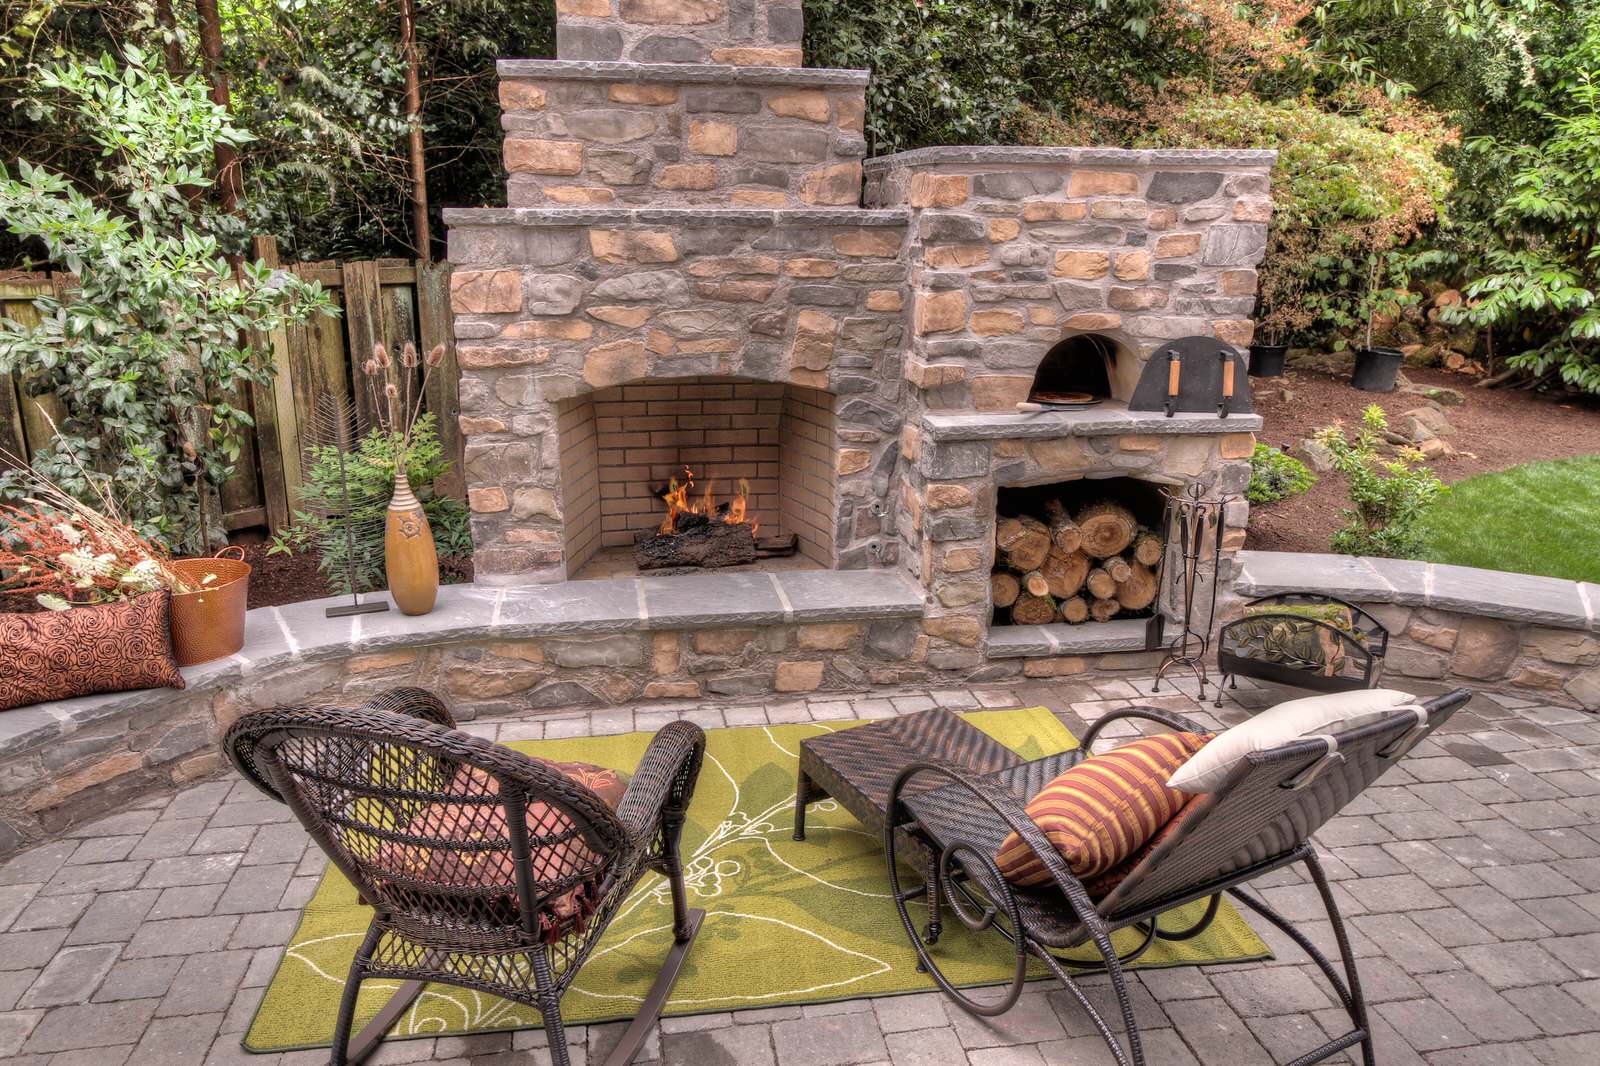 11 Unique Outdoor Fireplace With Pizza, Outdoor Fireplace Pizza Oven Ideas